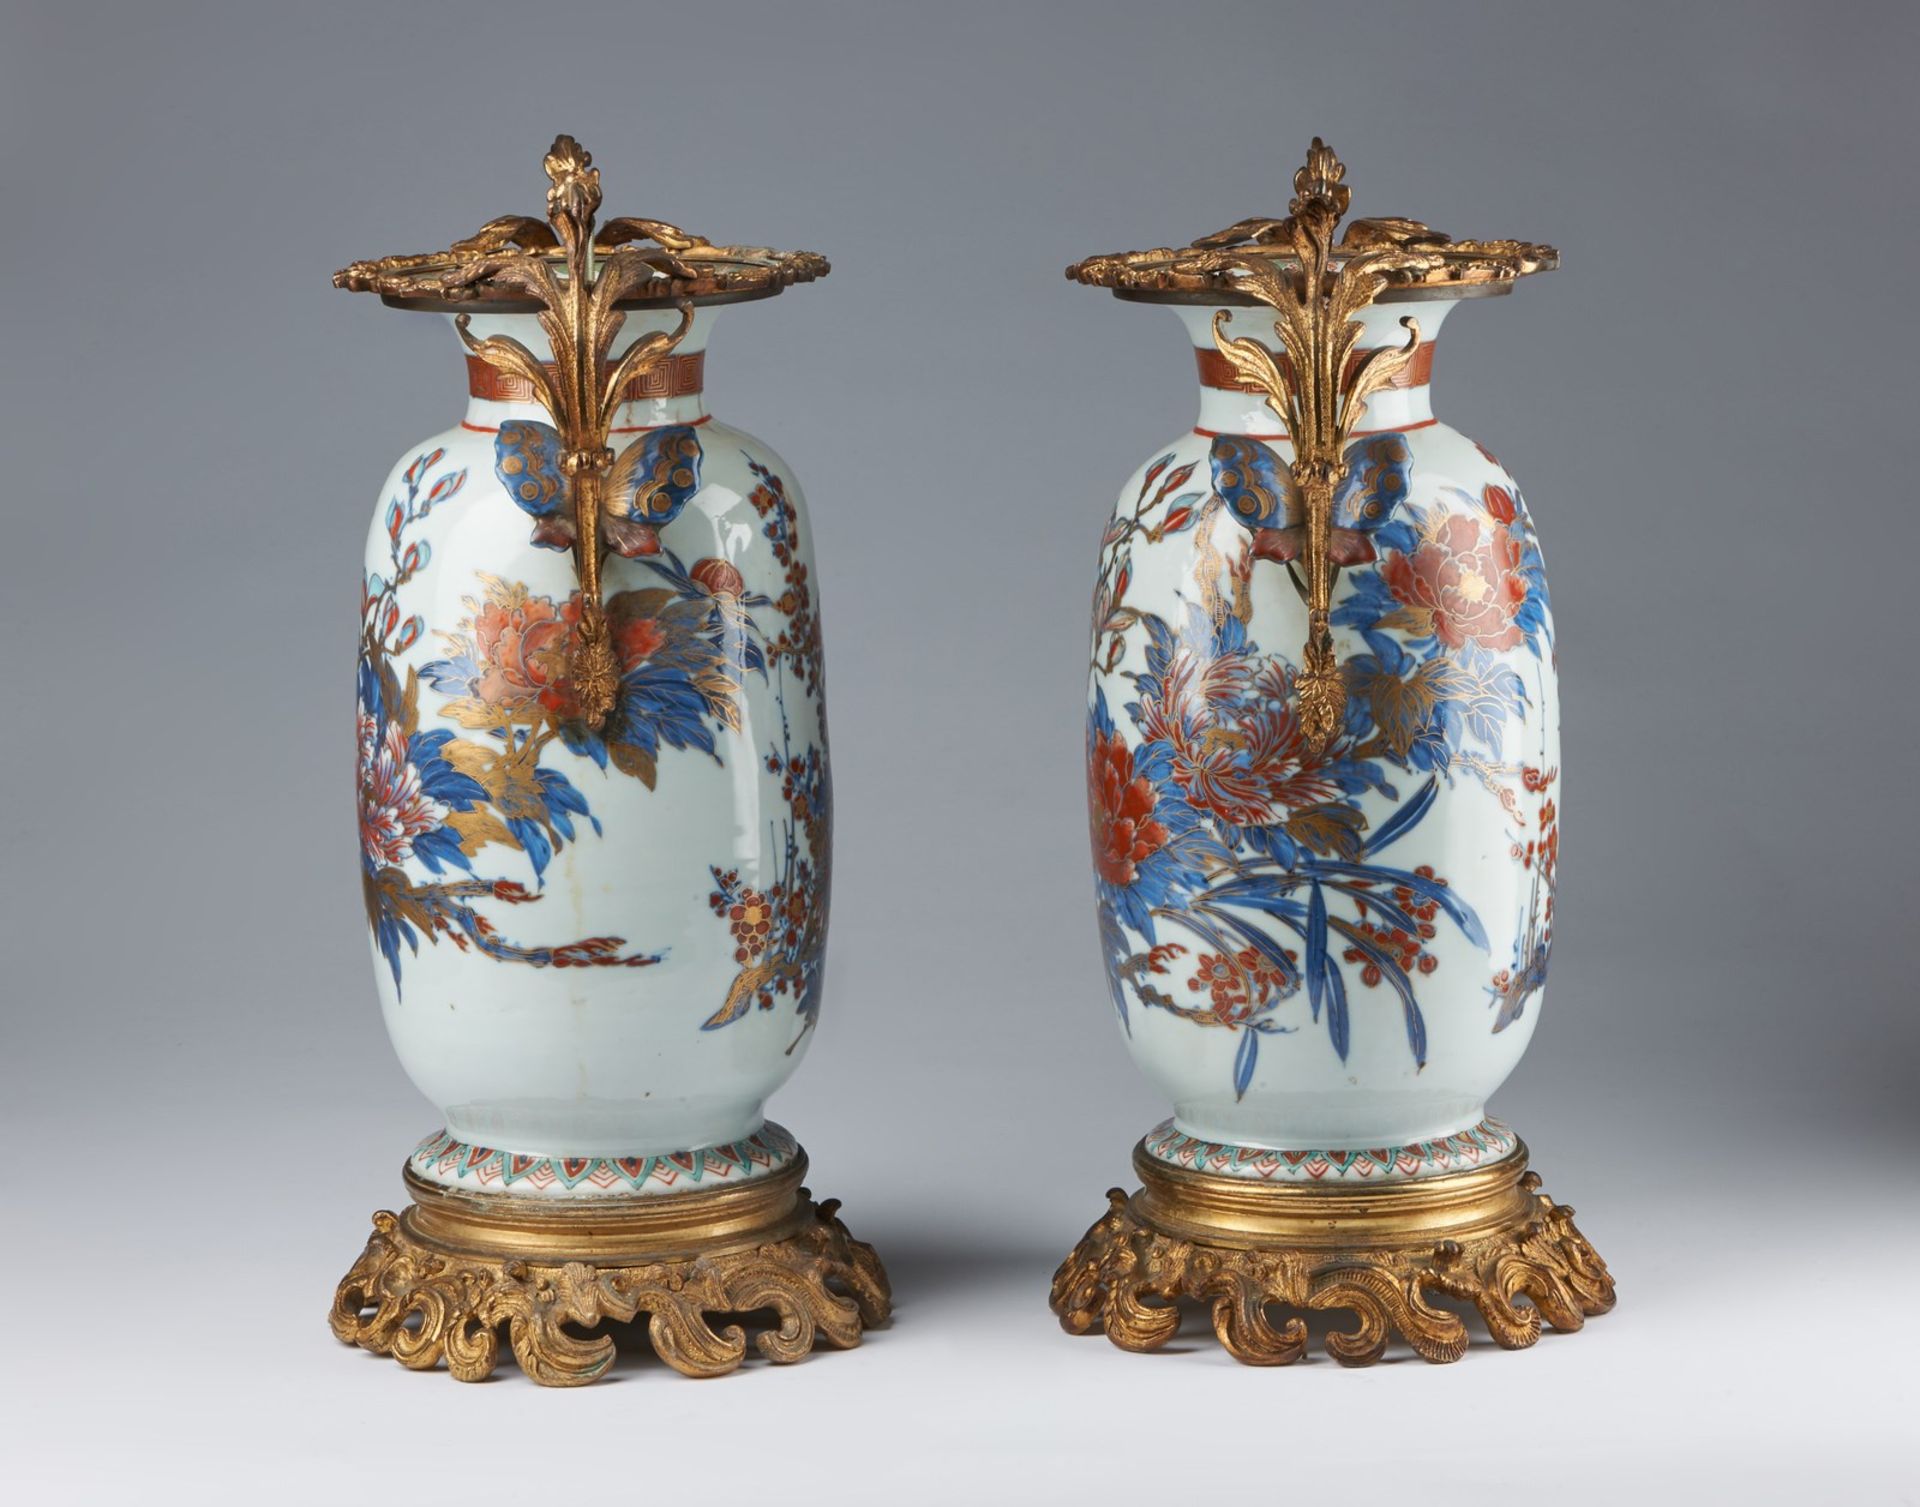 ARTE GIAPPONESE A pair of Imari pocelain vases with European bronze mount Japan, 18th-19th century - Image 2 of 4